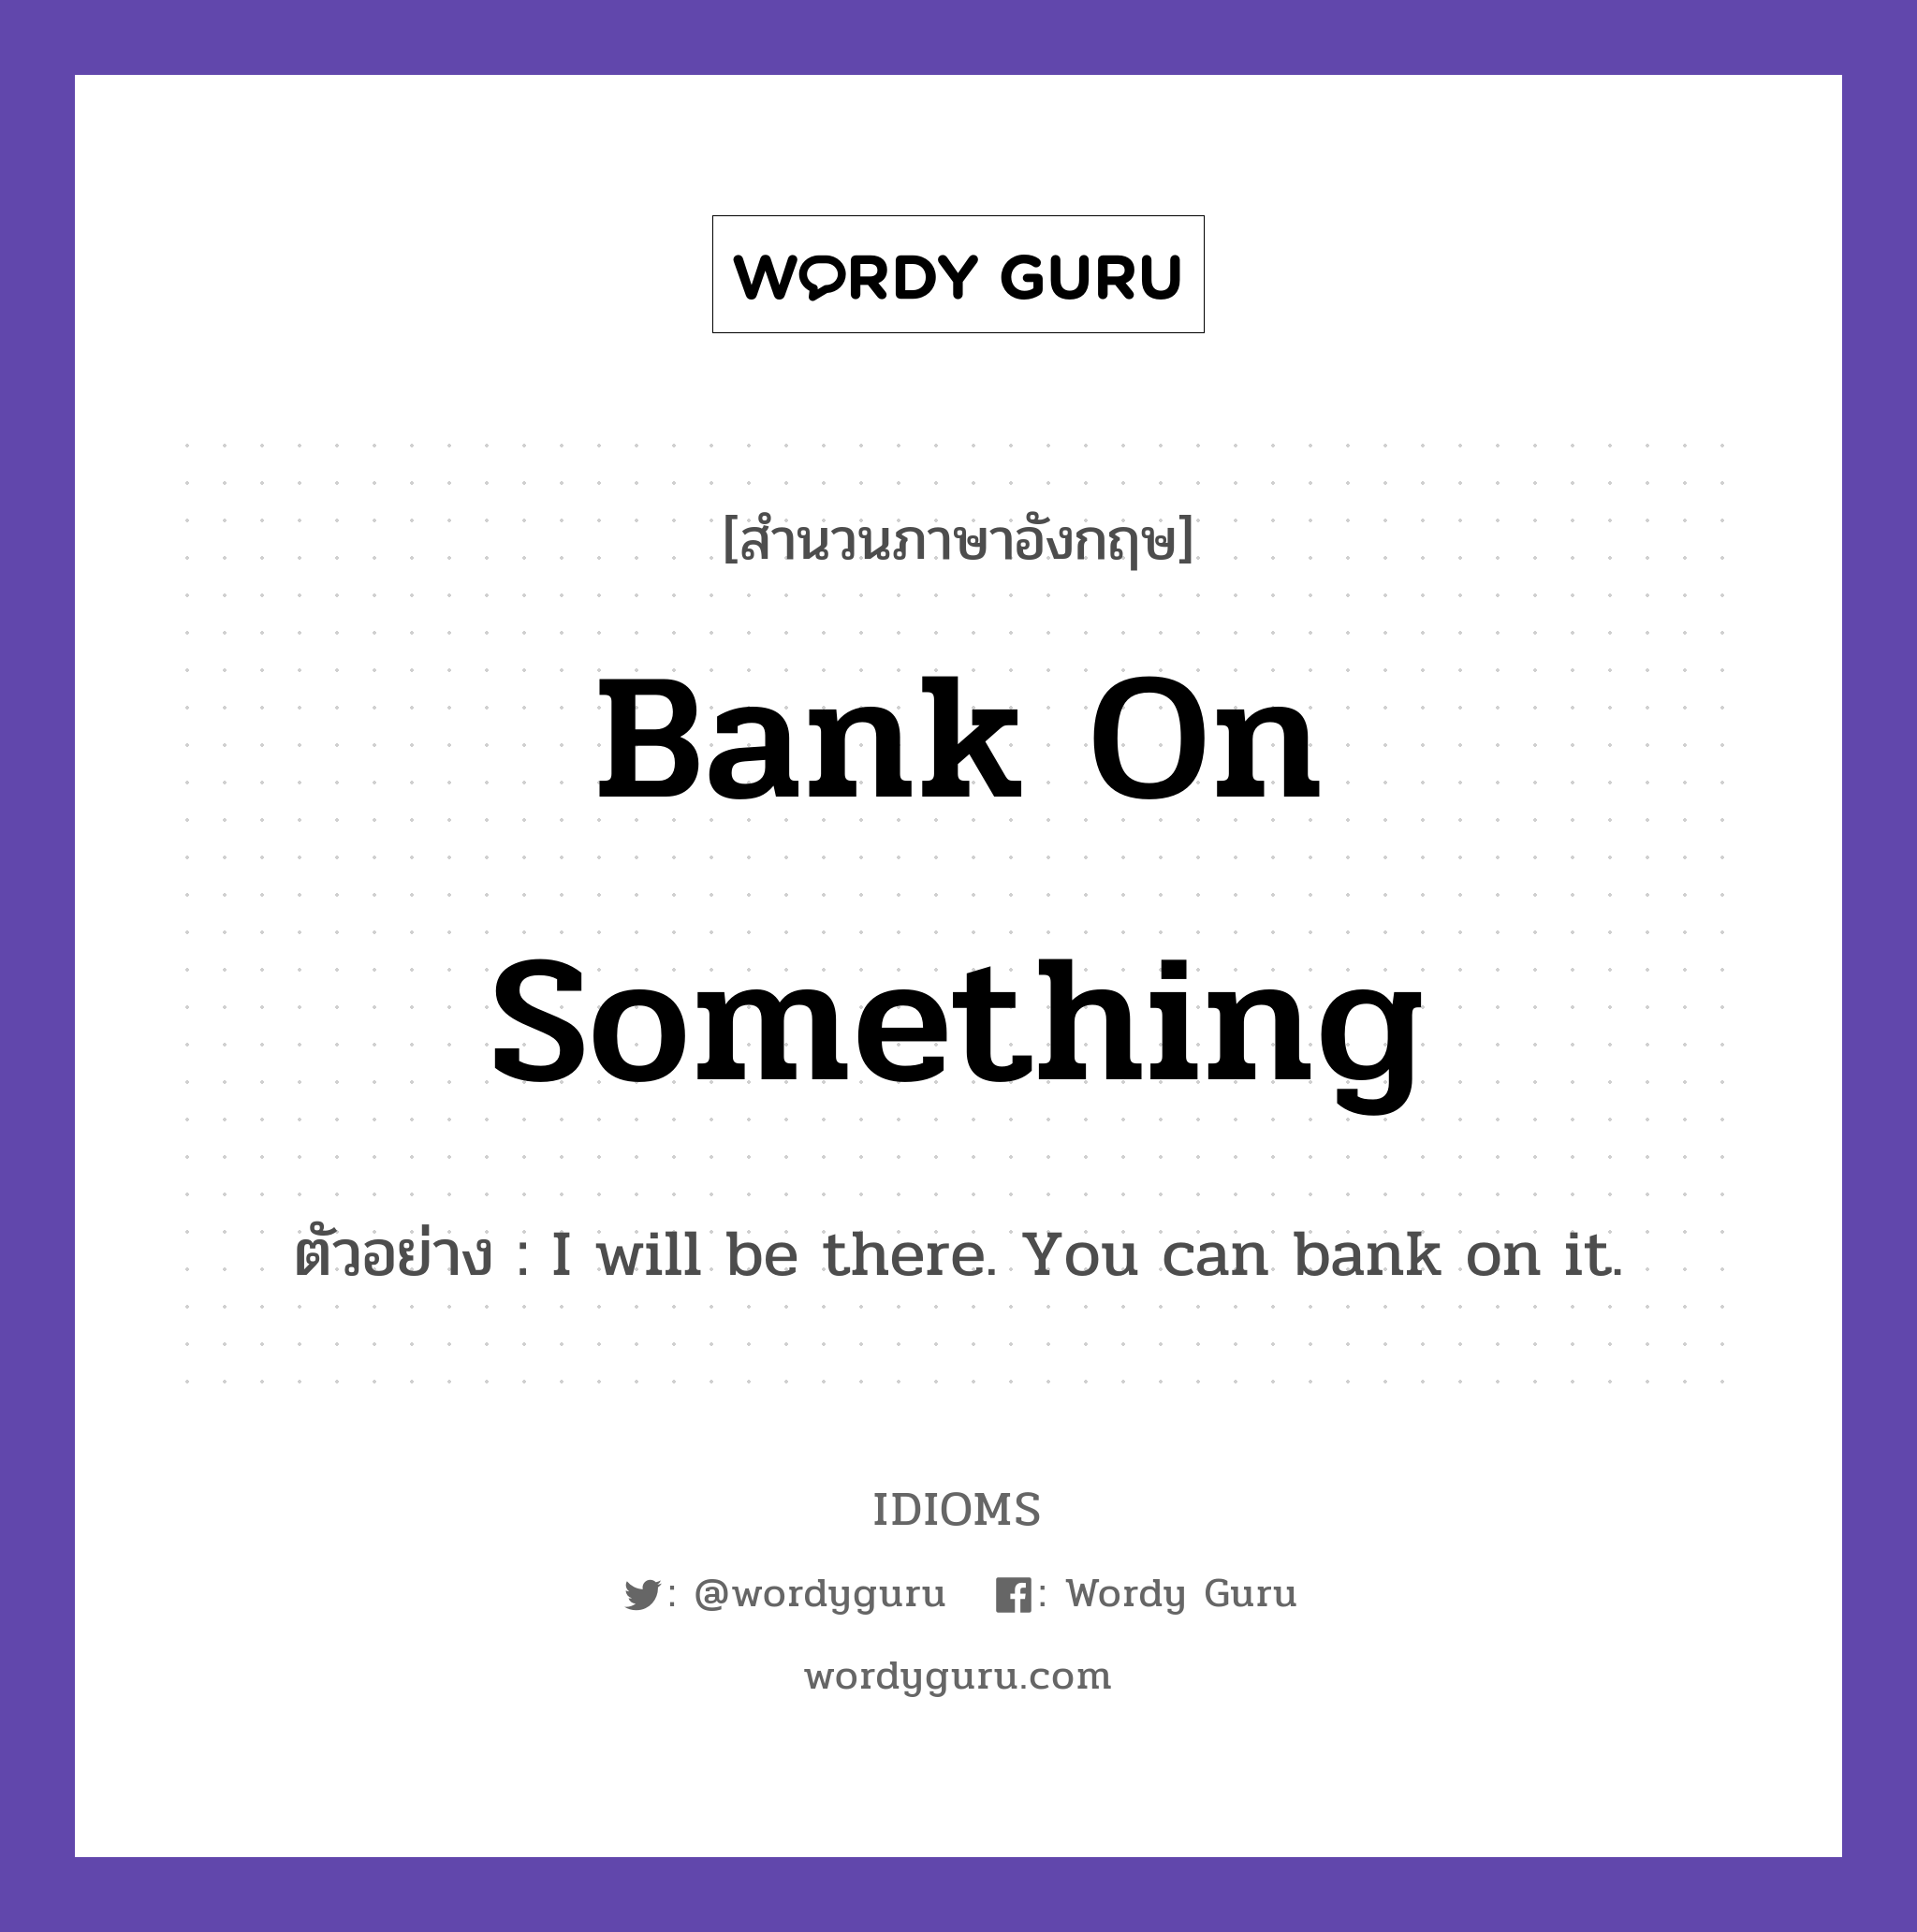 Bank On Something แปลว่า?, สำนวนภาษาอังกฤษ Bank On Something ตัวอย่าง I will be there. You can bank on it.